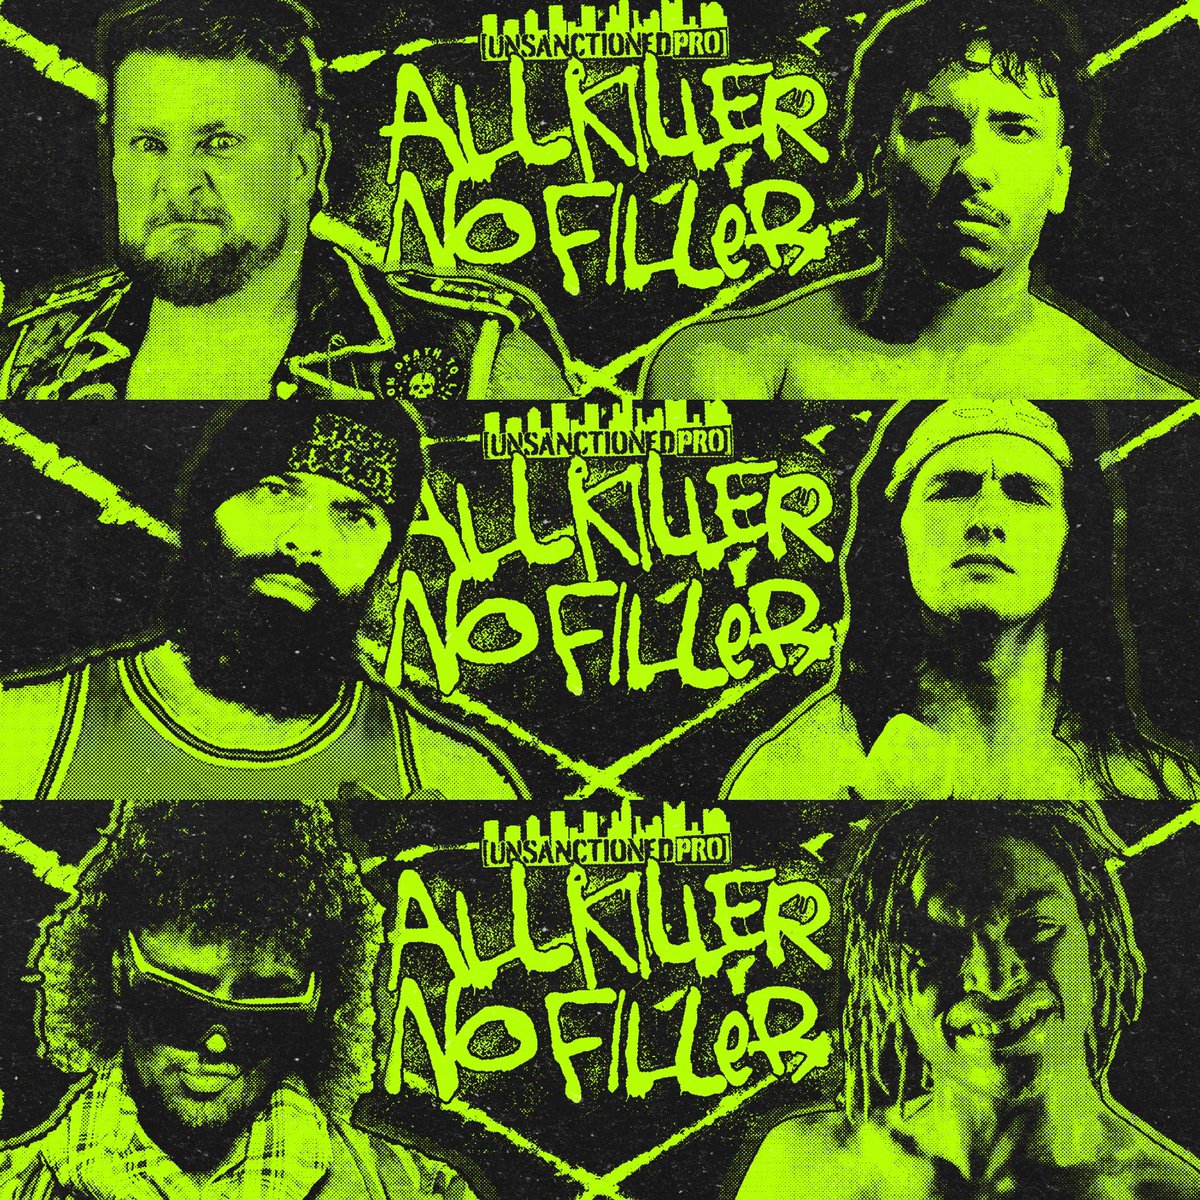 Just 60 days until ALL KILLER, NO FILLER, and we’ve already announced 3 matches that could main event anywhere. ⚠️ BEEF vs MARTYR ⚠️ COLON vs GIZA ⚠️ BEALE vs ROBINSON Much more still TBA! Grab your GA tickets now. 🎟️ 614WRESTLING.COM